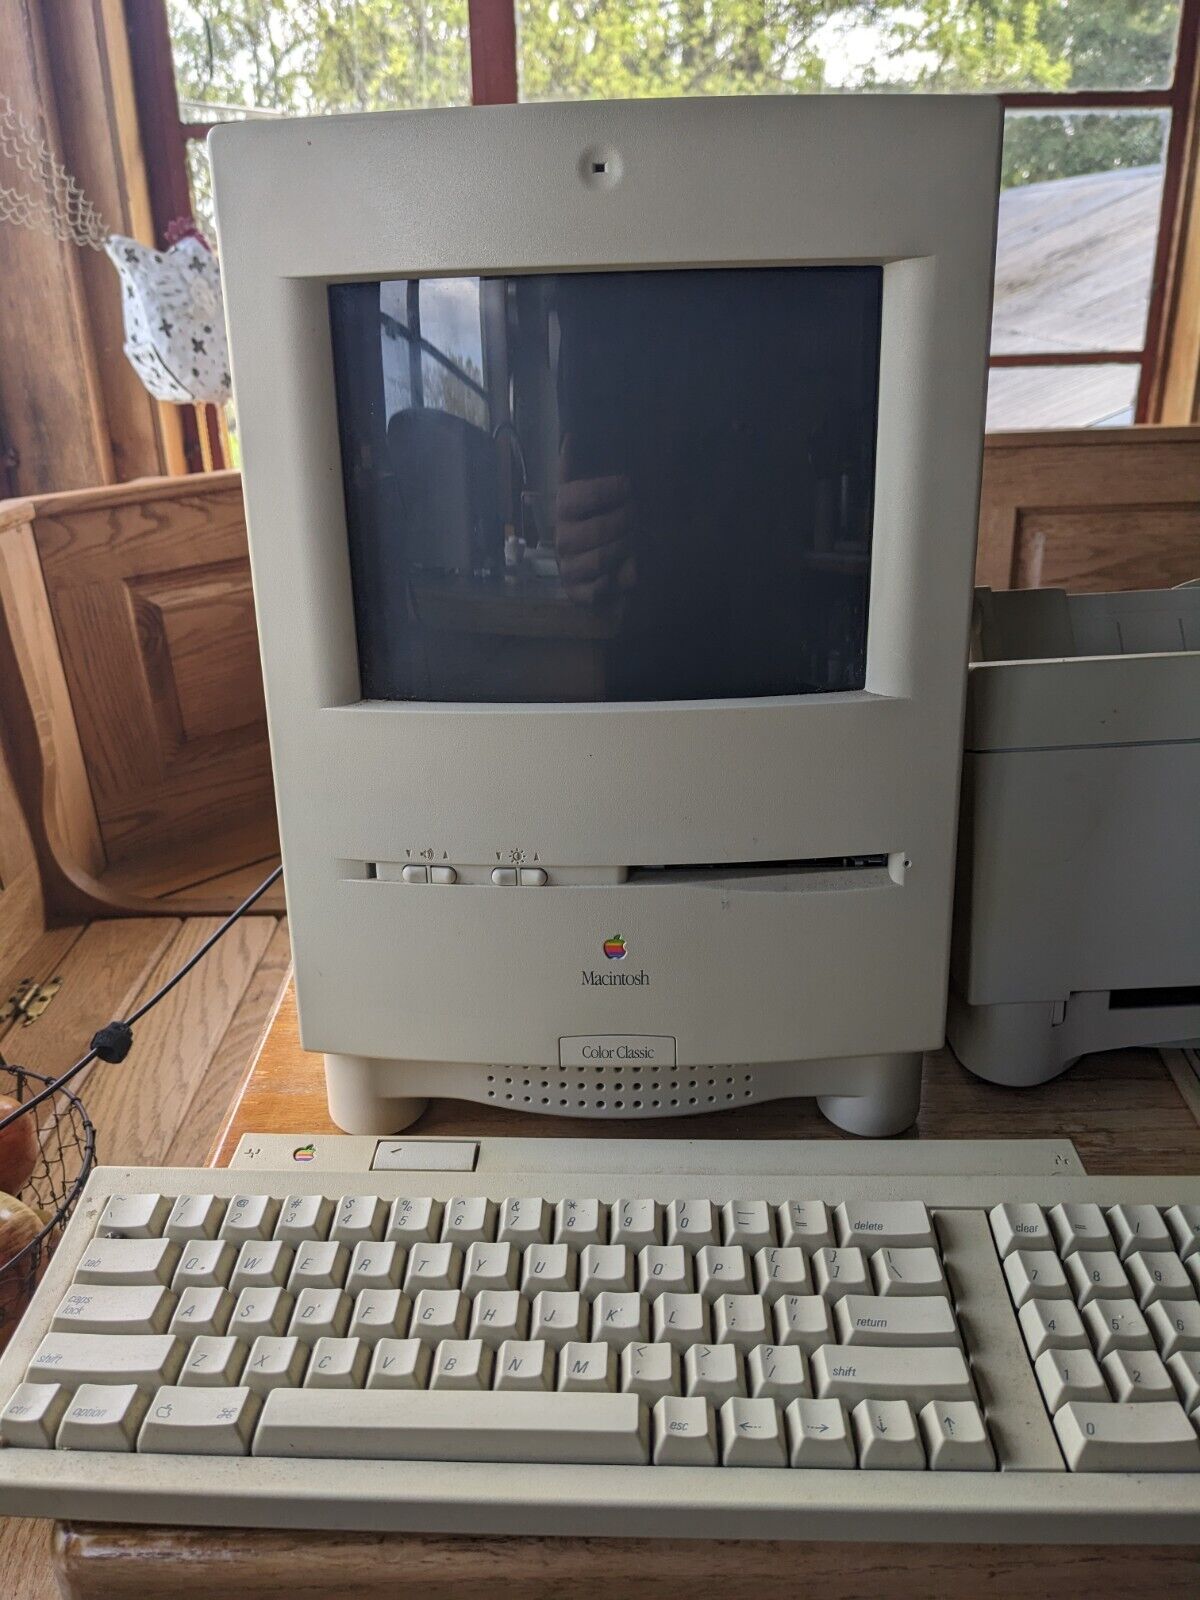 Apple Macintosh Color Classic bundle with software & Stylewriter II printer